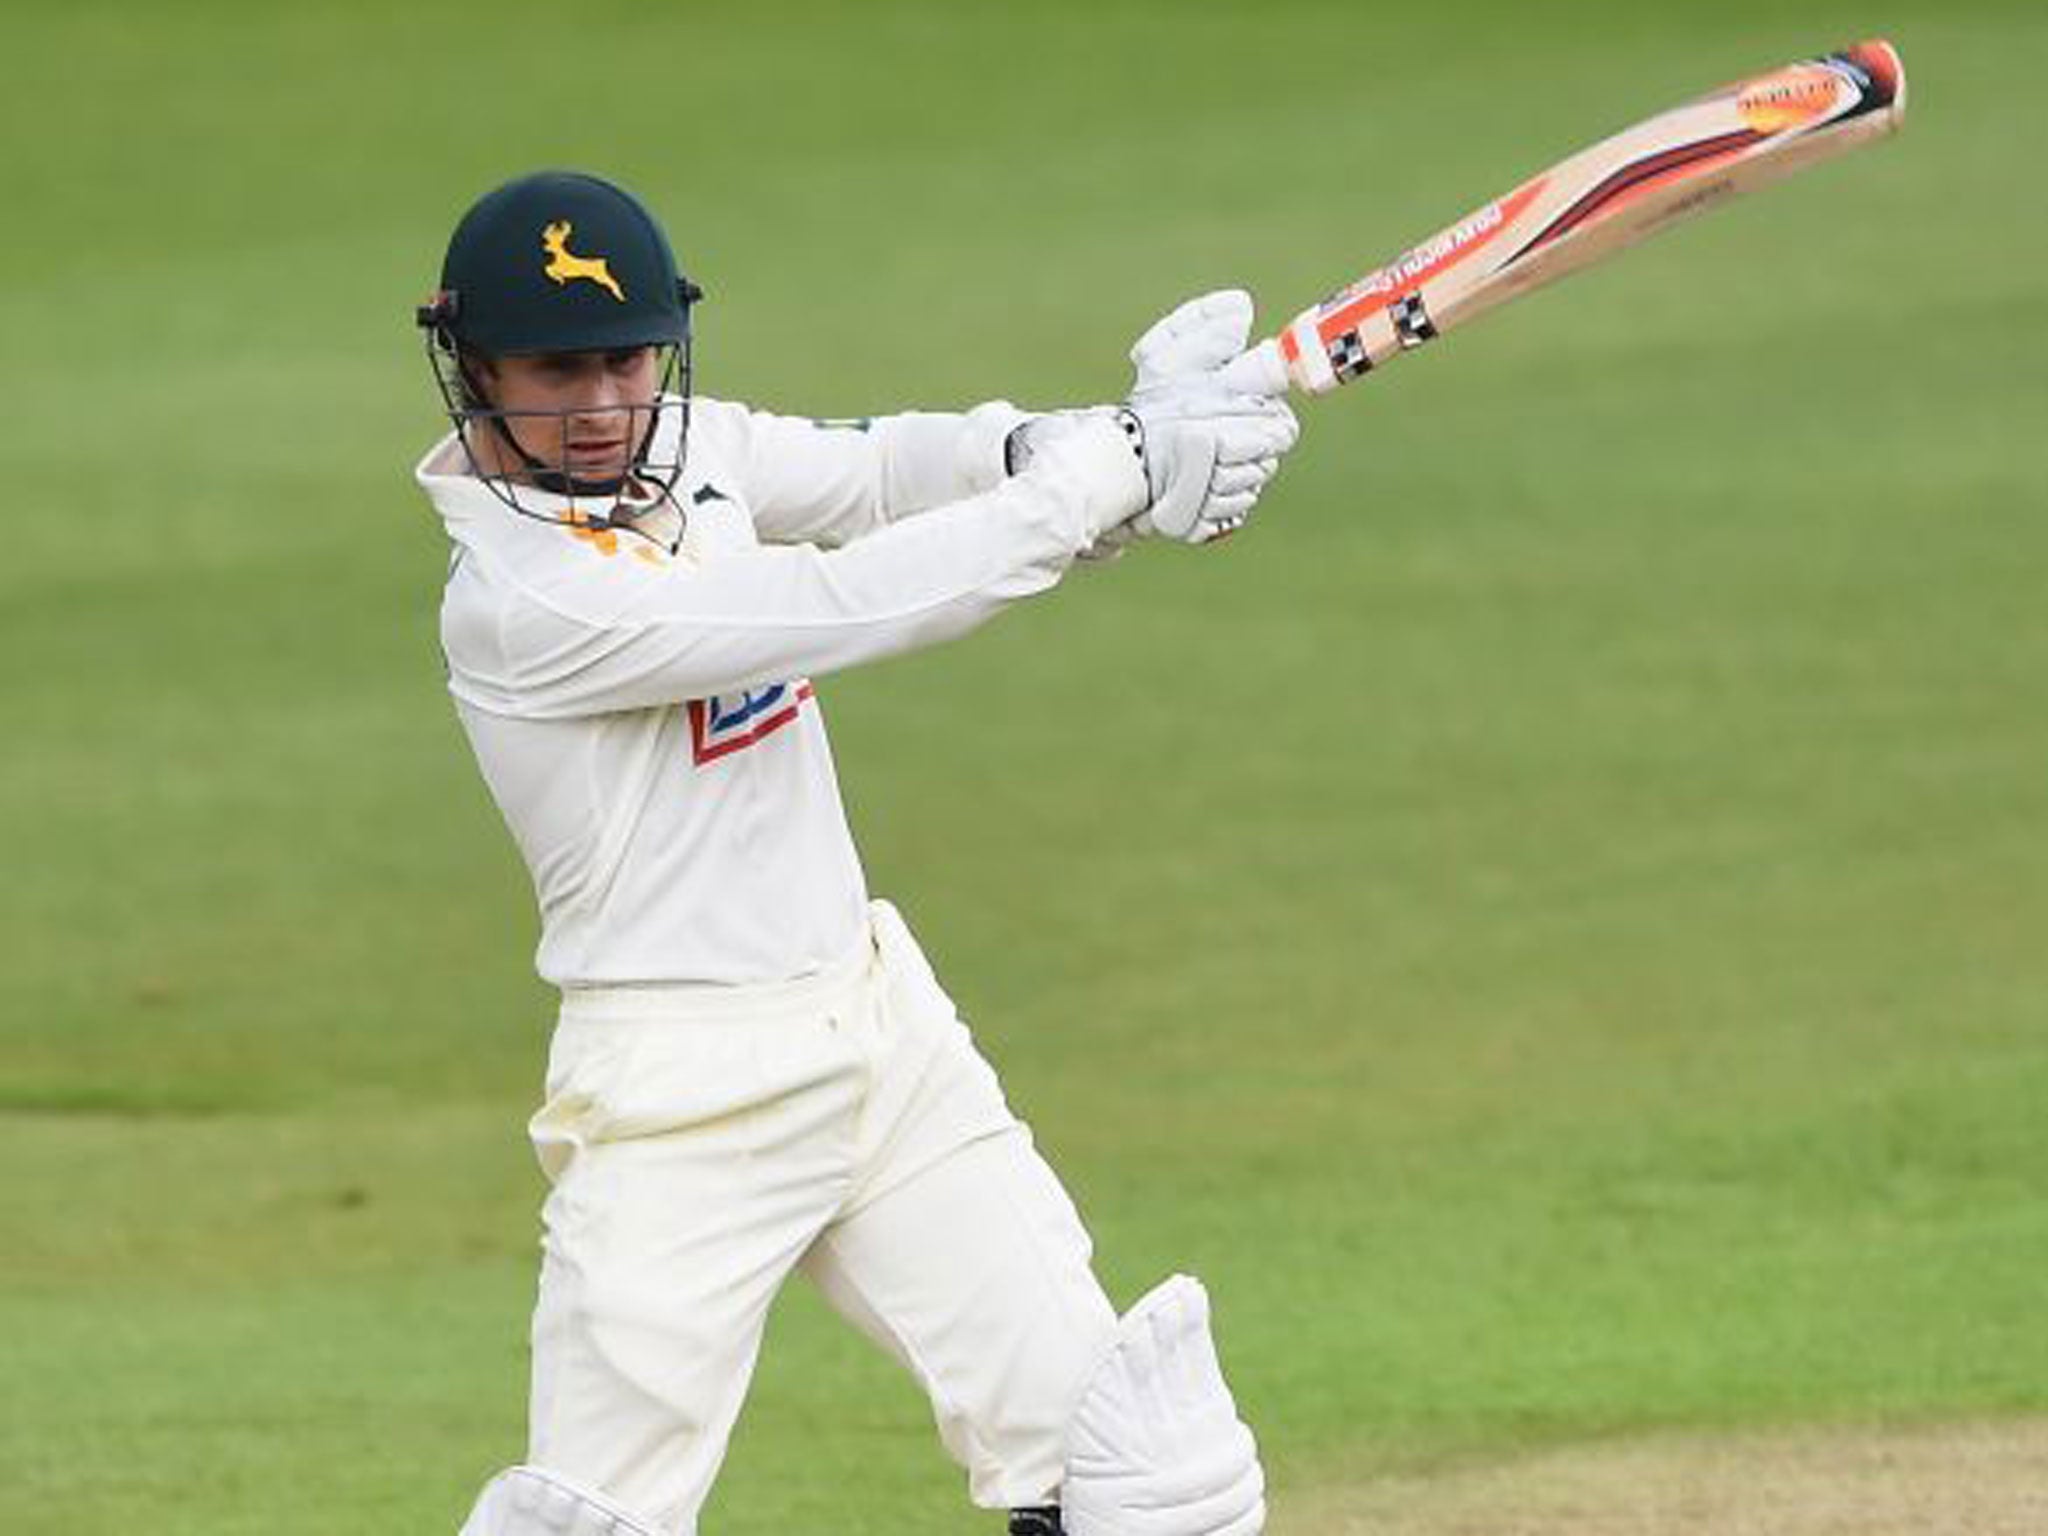 James Taylor was only given two Tests against South Africa to stake his claim for an England place played two Tests in 2012, scored 96 yesterday with Test places up for grabs